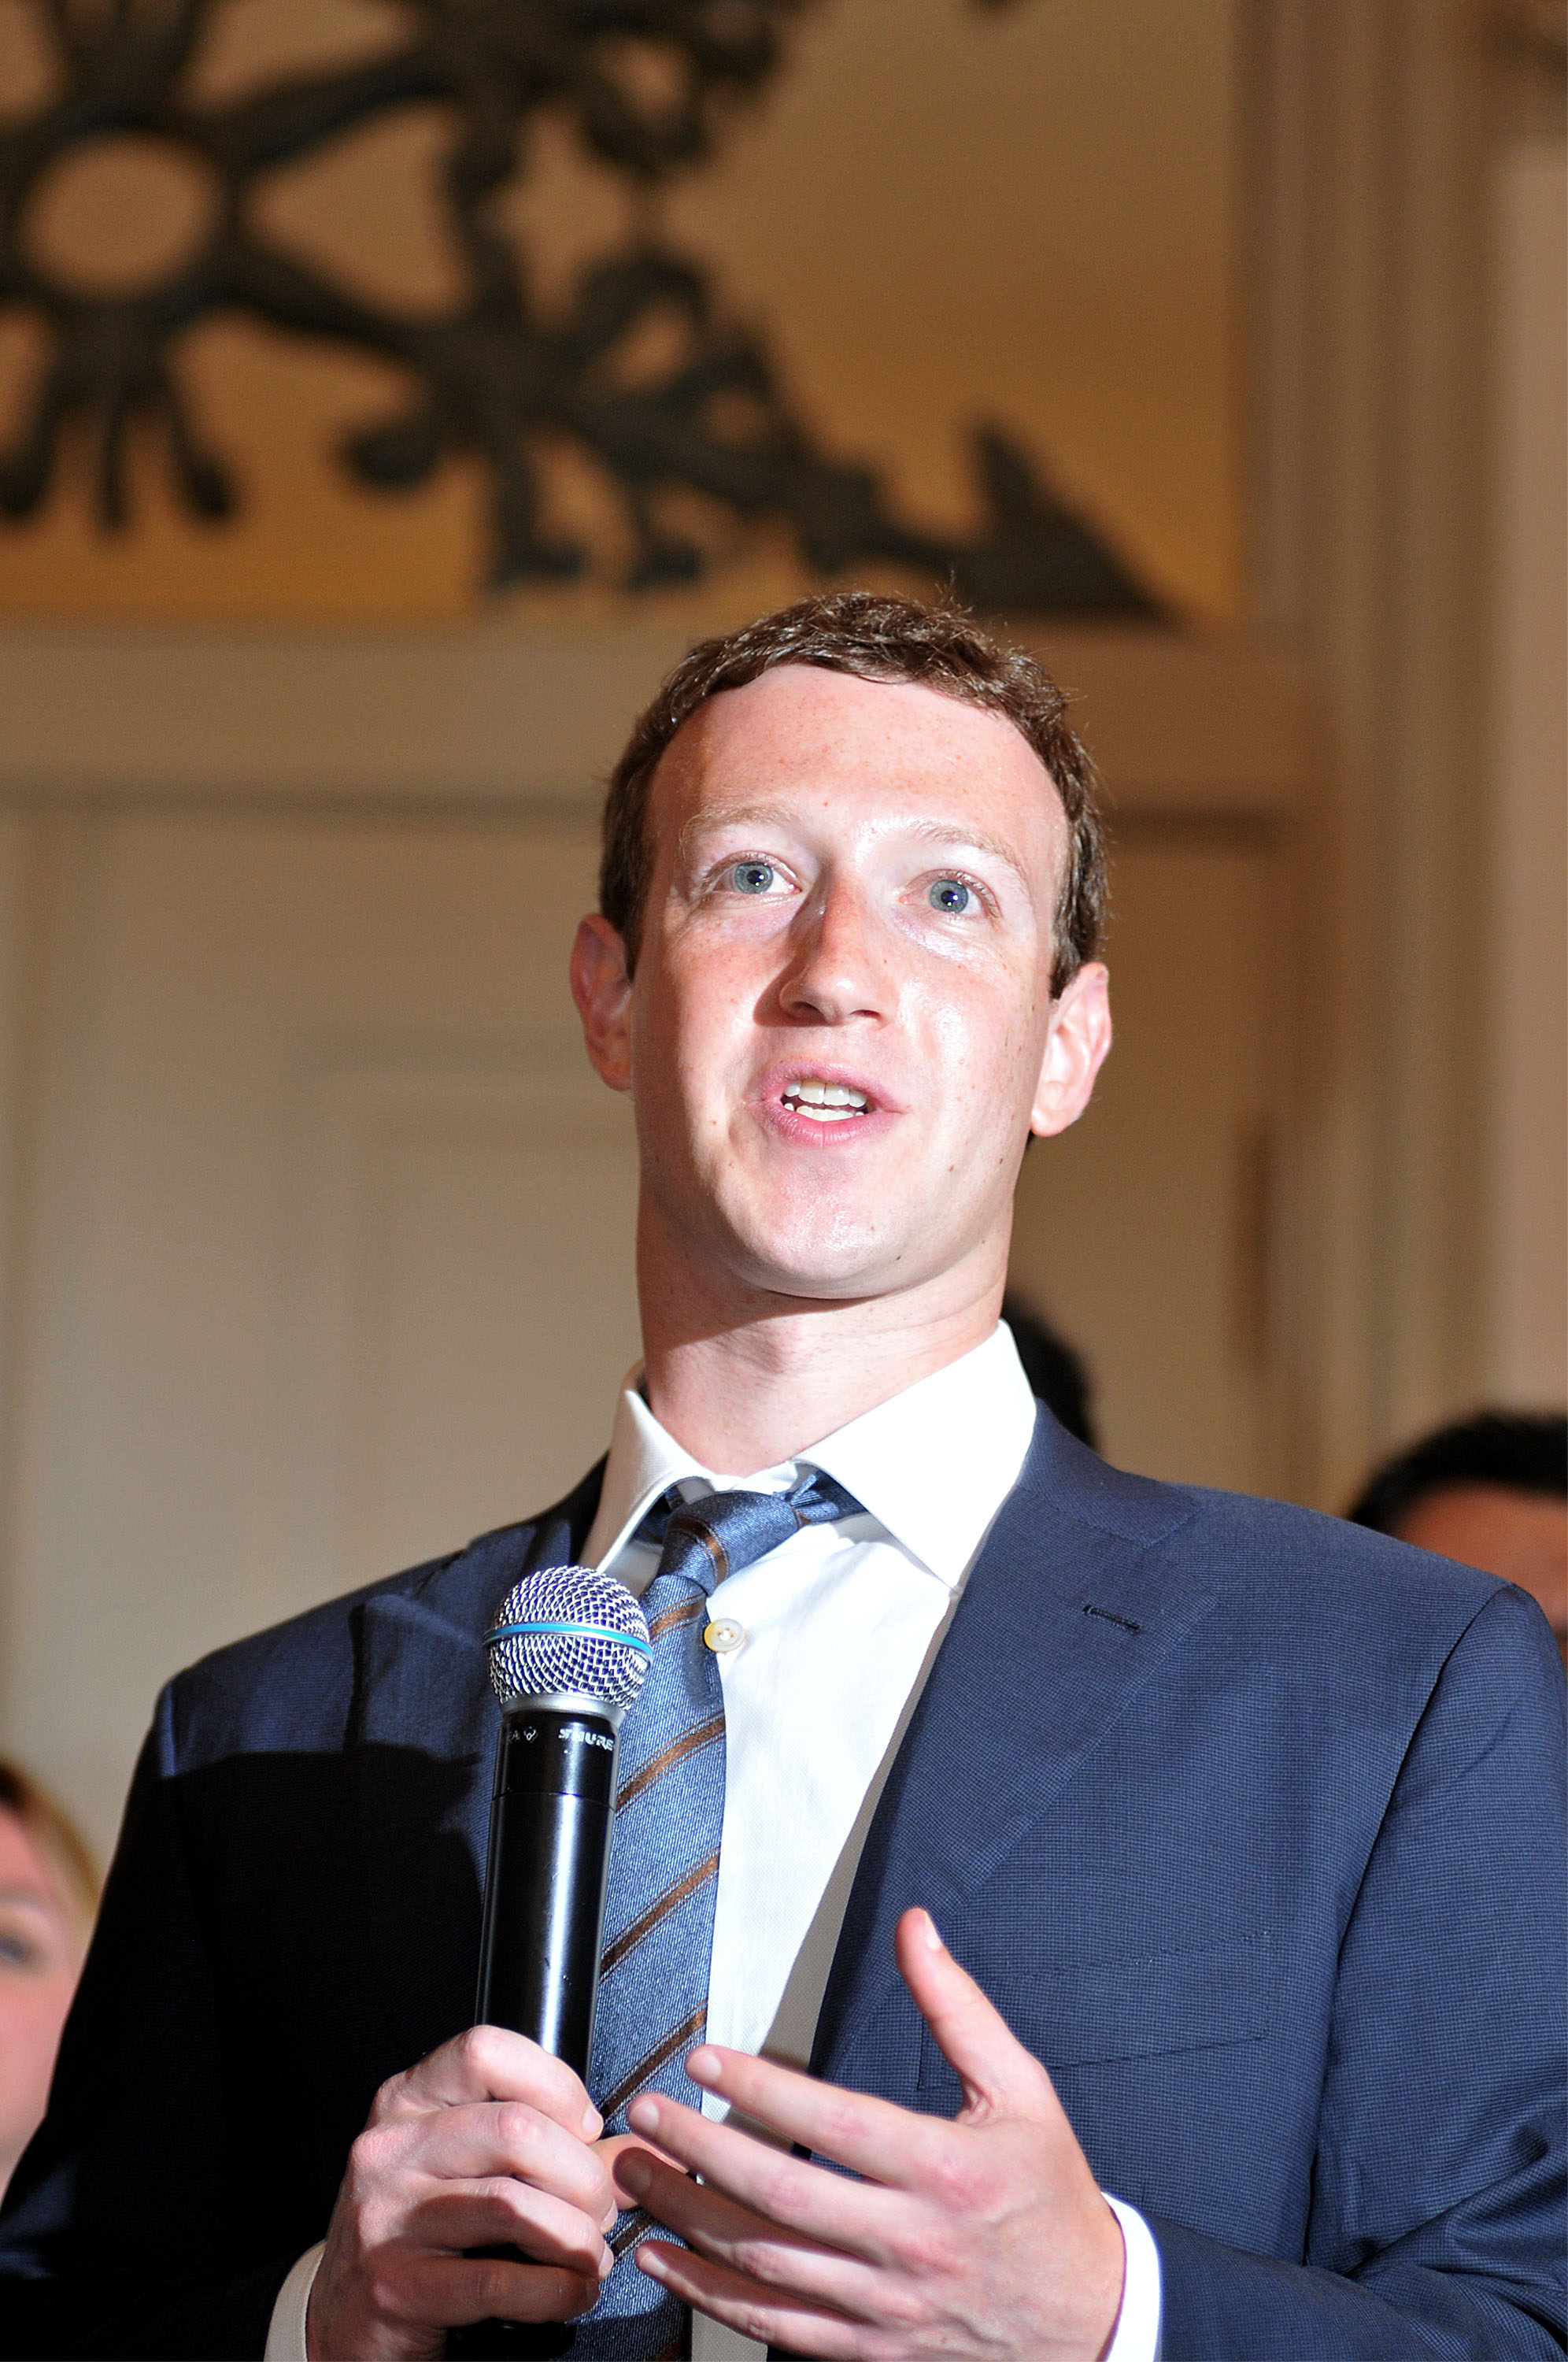 Facebook founder Mark Zuckenberg speaks to media after the meeting with Indonesian President-elect Joko Widodo in Jakarta, Indonesia on October 13, 2014.